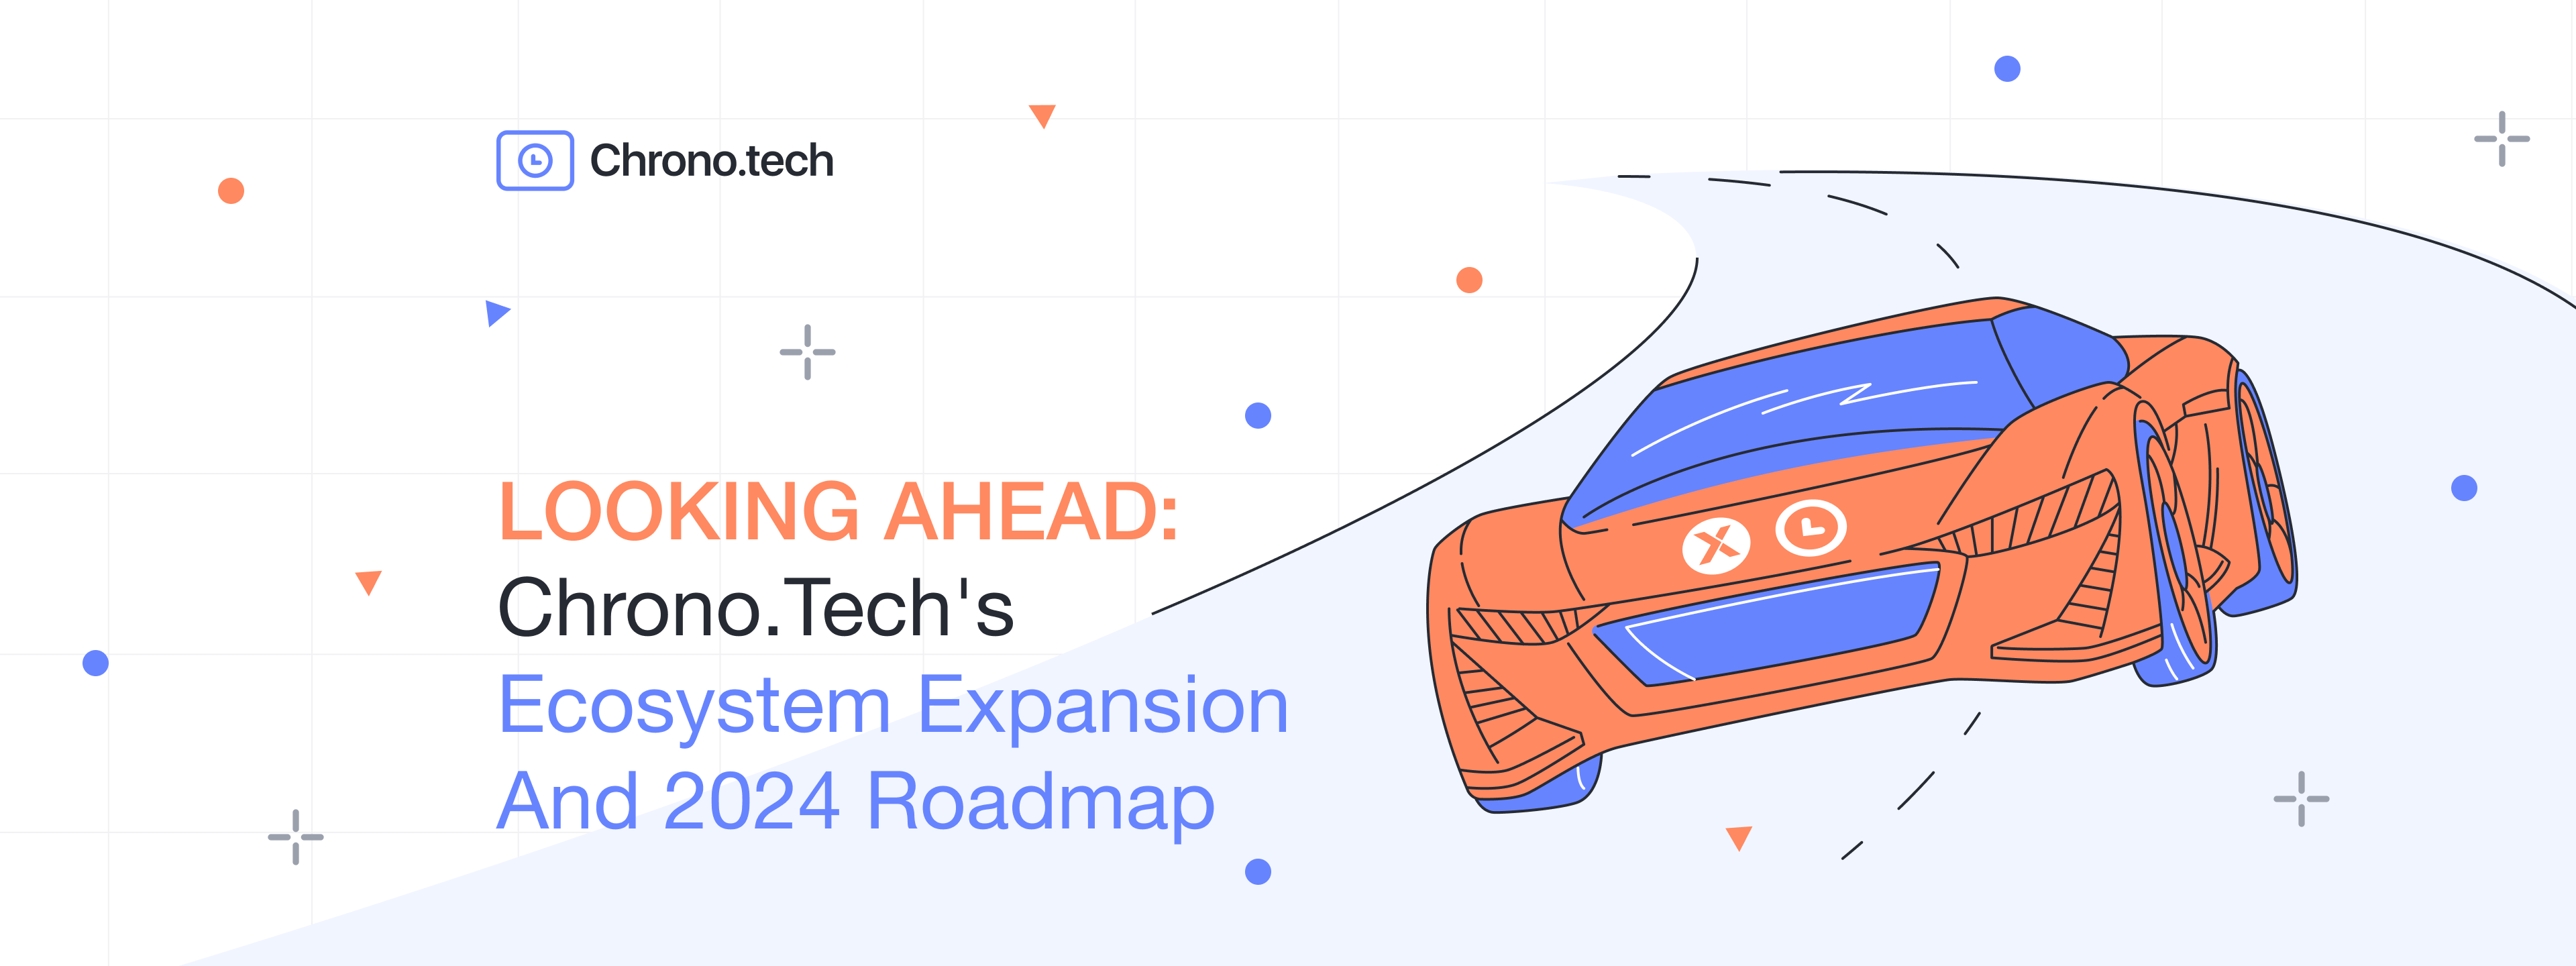 Looking Ahead: Chrono.tech's Ecosystem Expansion and 2024 Roadmap